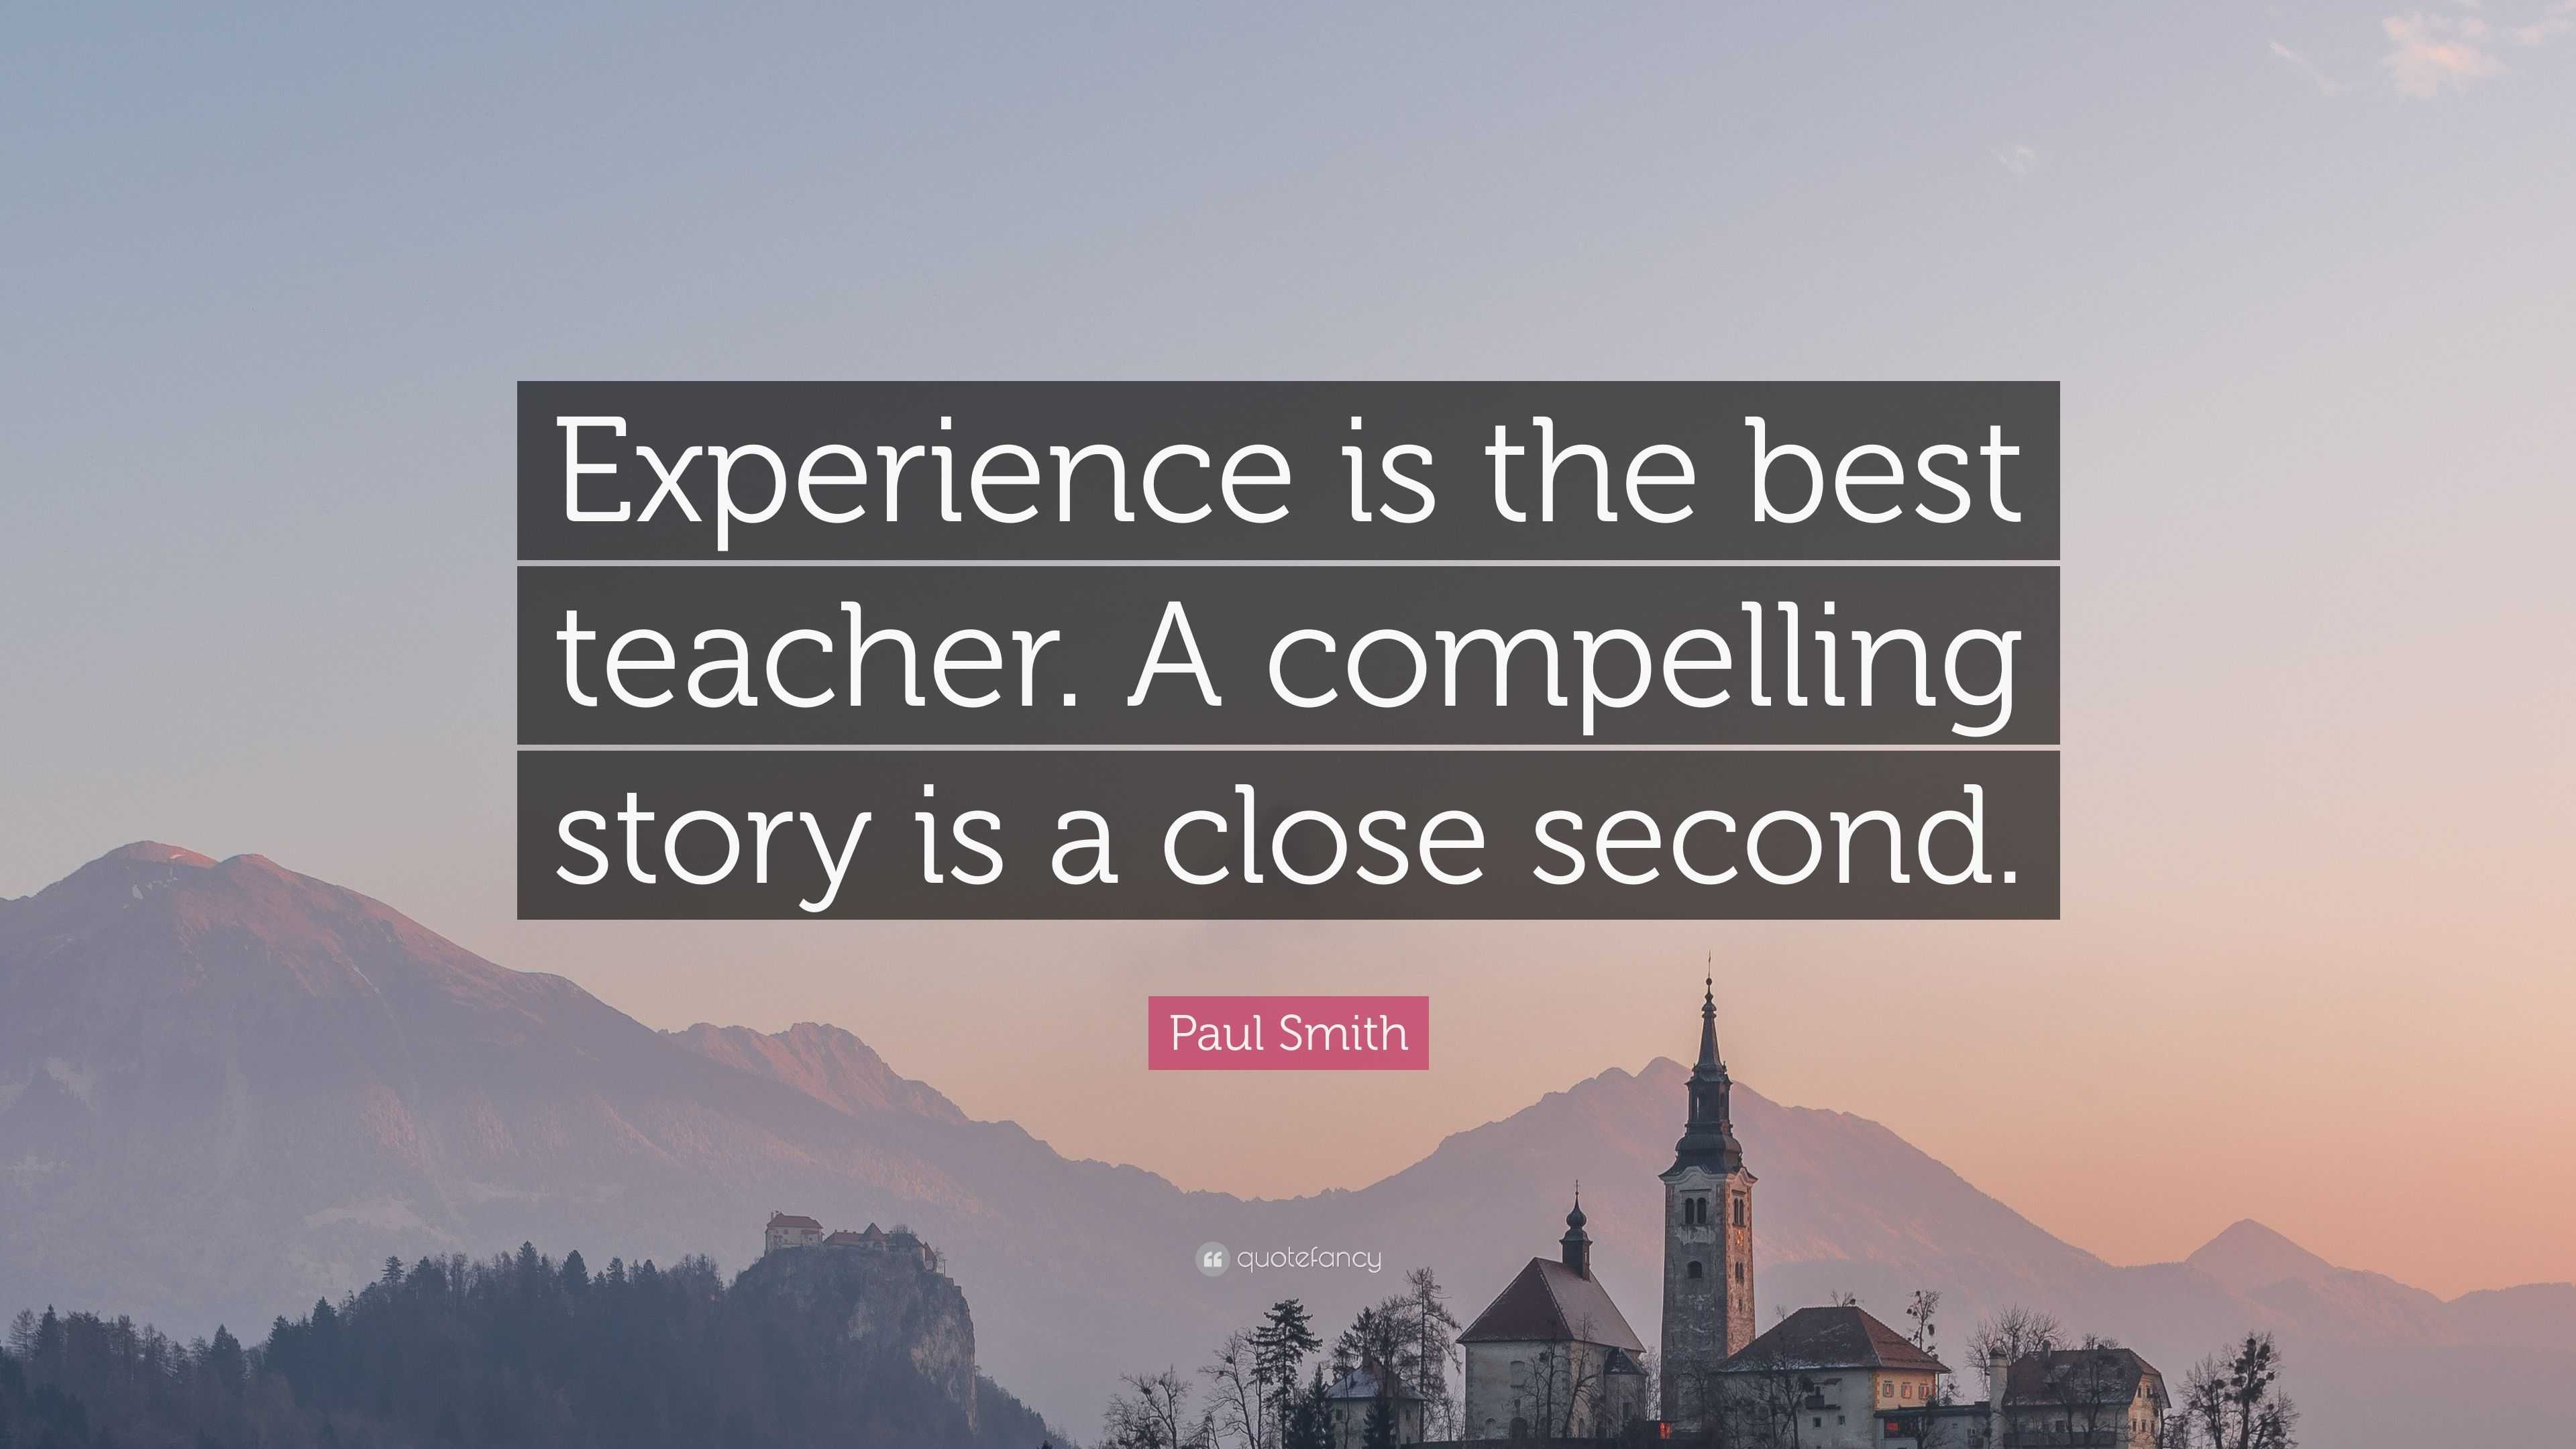 Paul Smith Quote: "Experience is the best teacher. A compelling story is a close second."